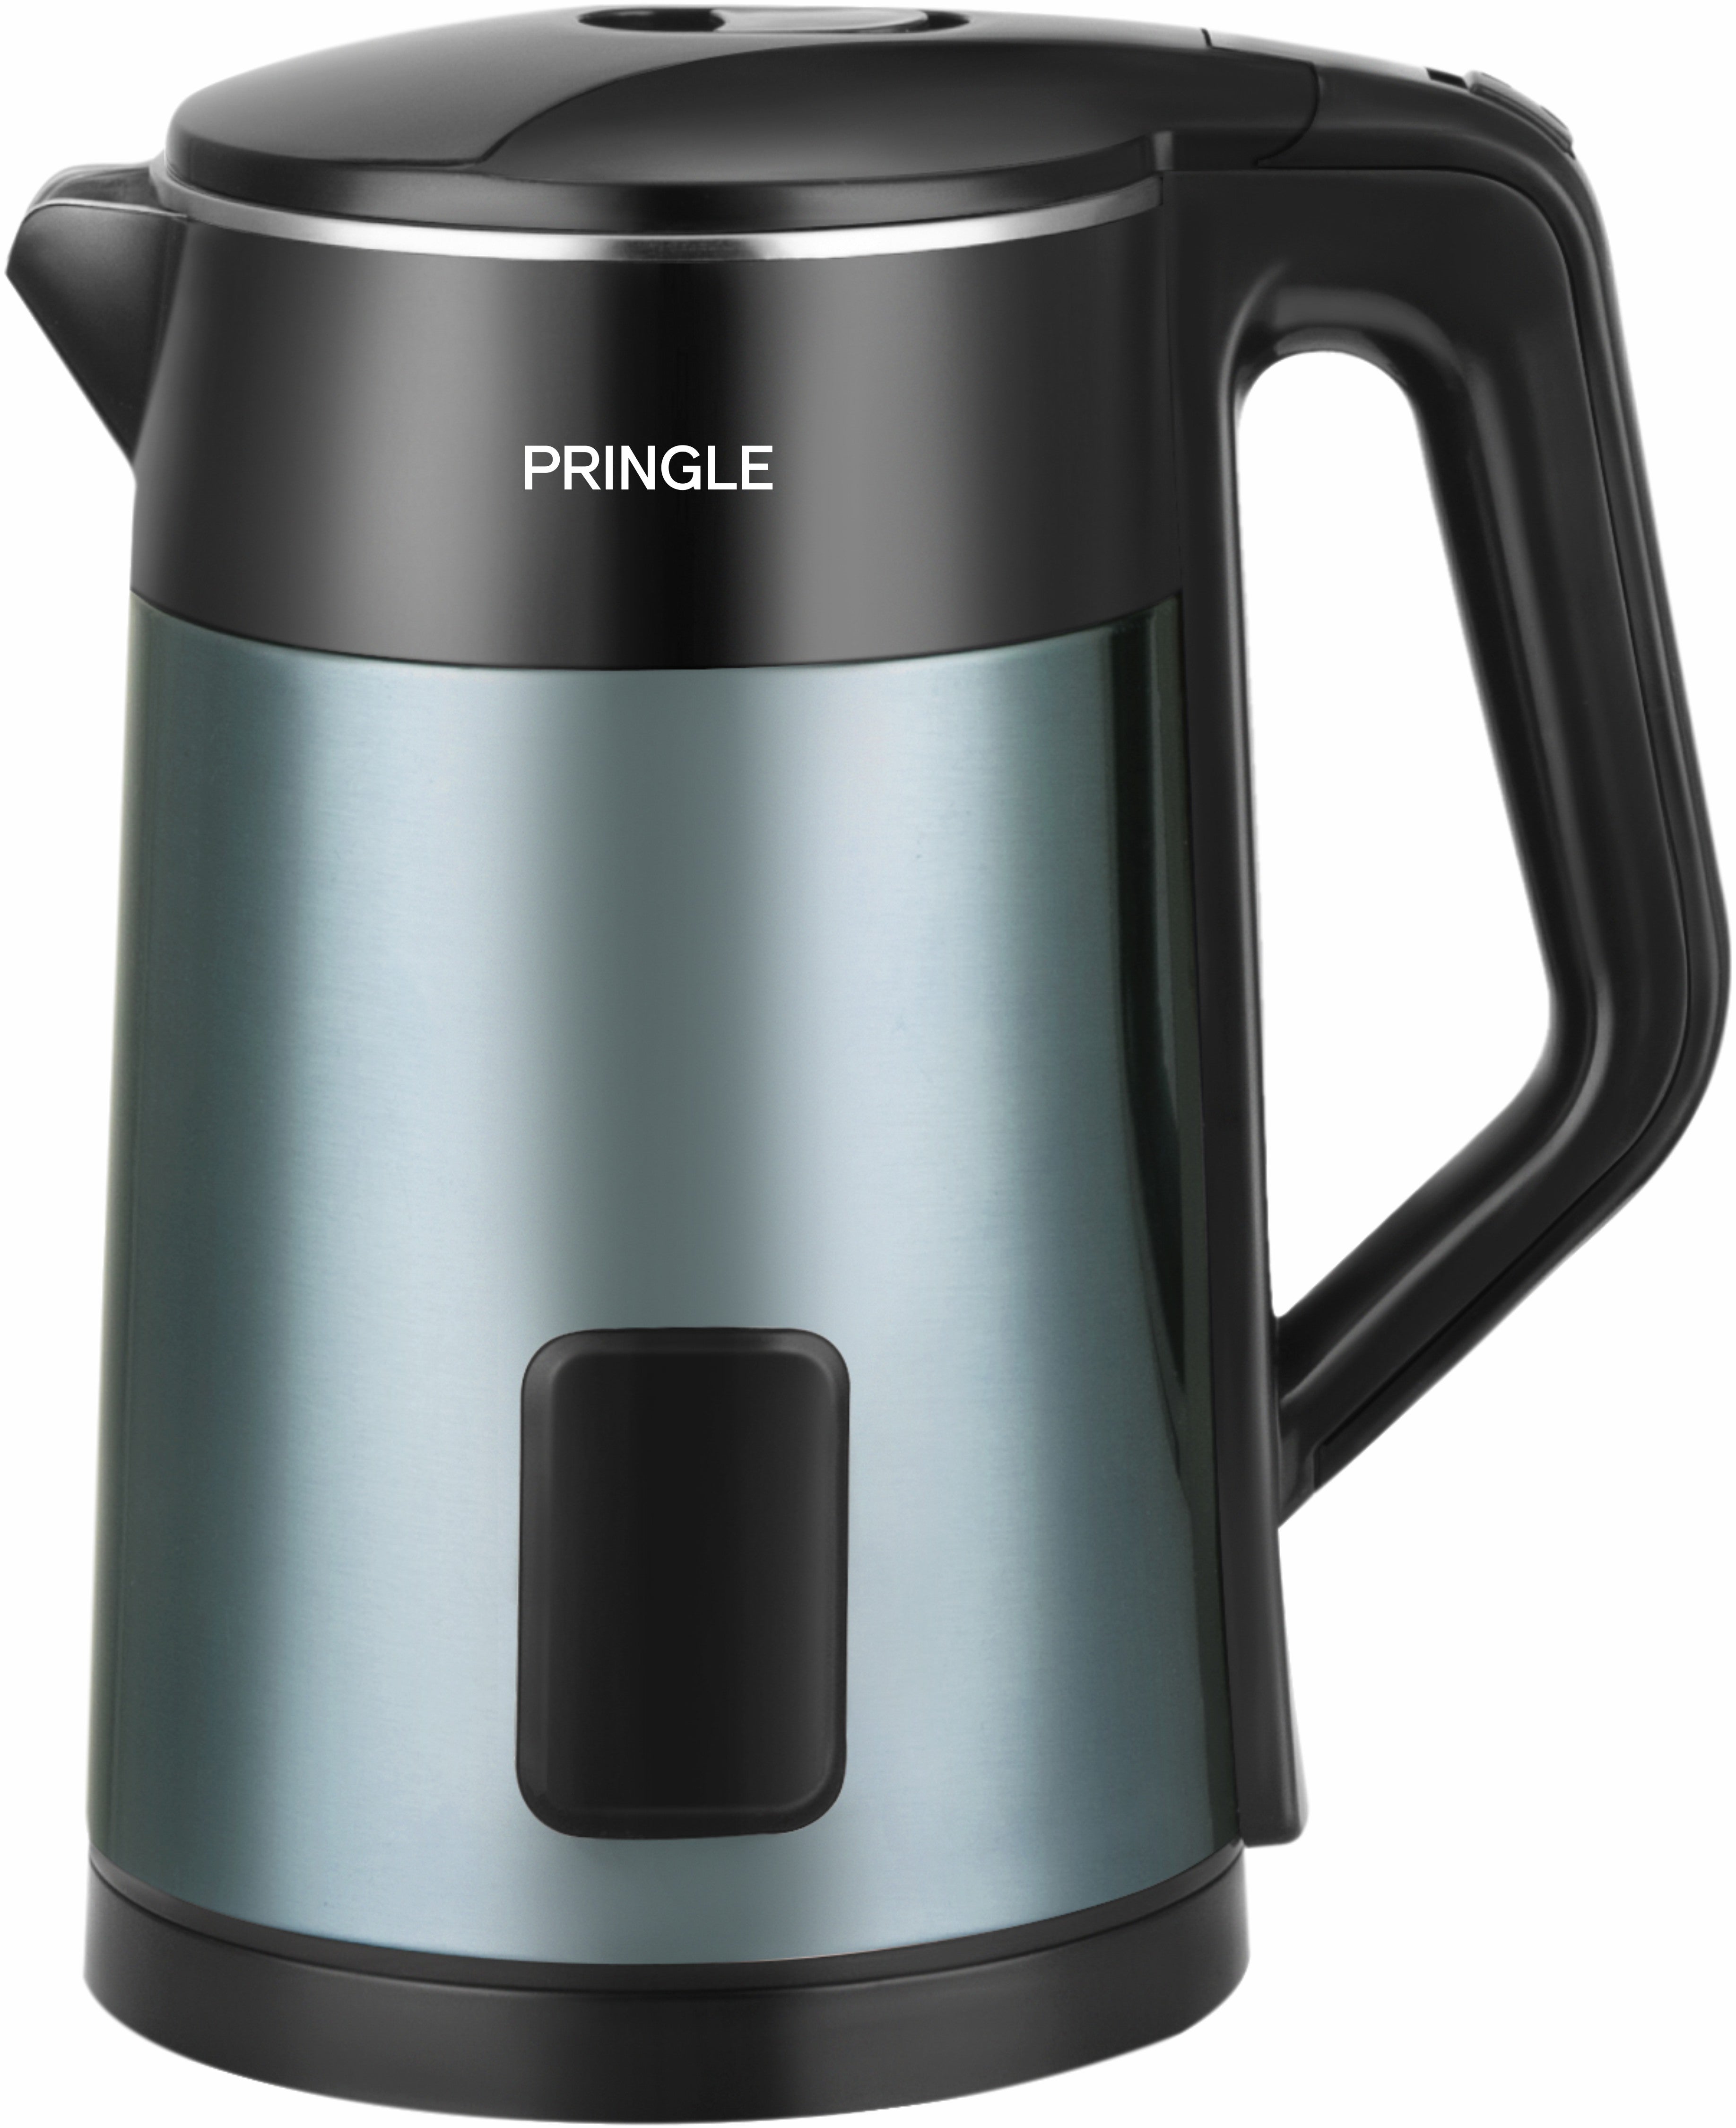 Pringle Electric Kettle Double Wall 2L - AQUA 1500W with Boil Dry Protection & Auto-Shut Off| Inbuilt SS Filter Sieve, Concealed Heating Element| 360 Deg Cordless Base, (Black) - Pringle Appliances